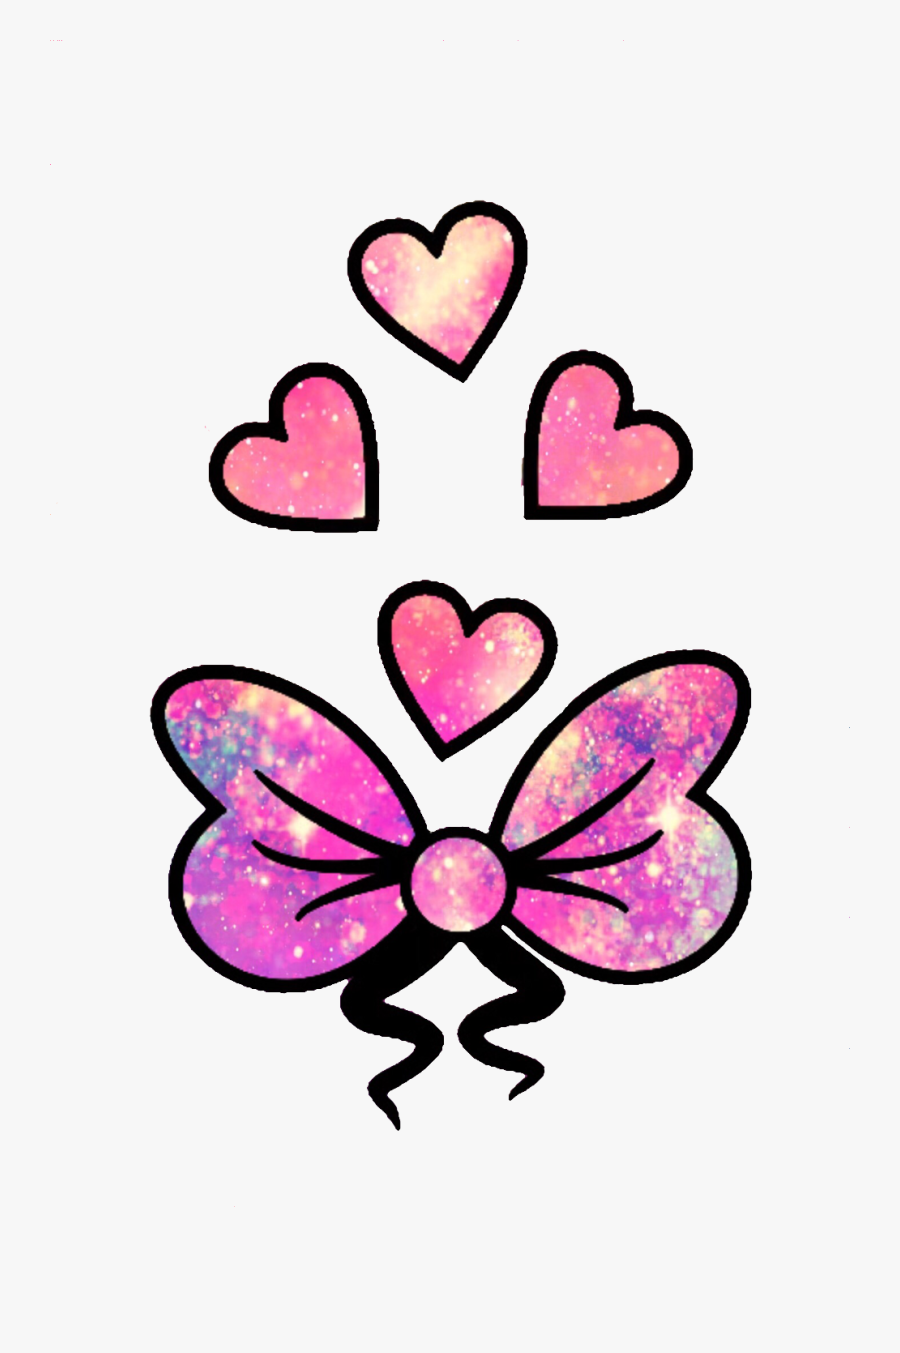 Transparent Girly Bow Clipart - Glitter Cute Love Hearts, Transparent Clipart